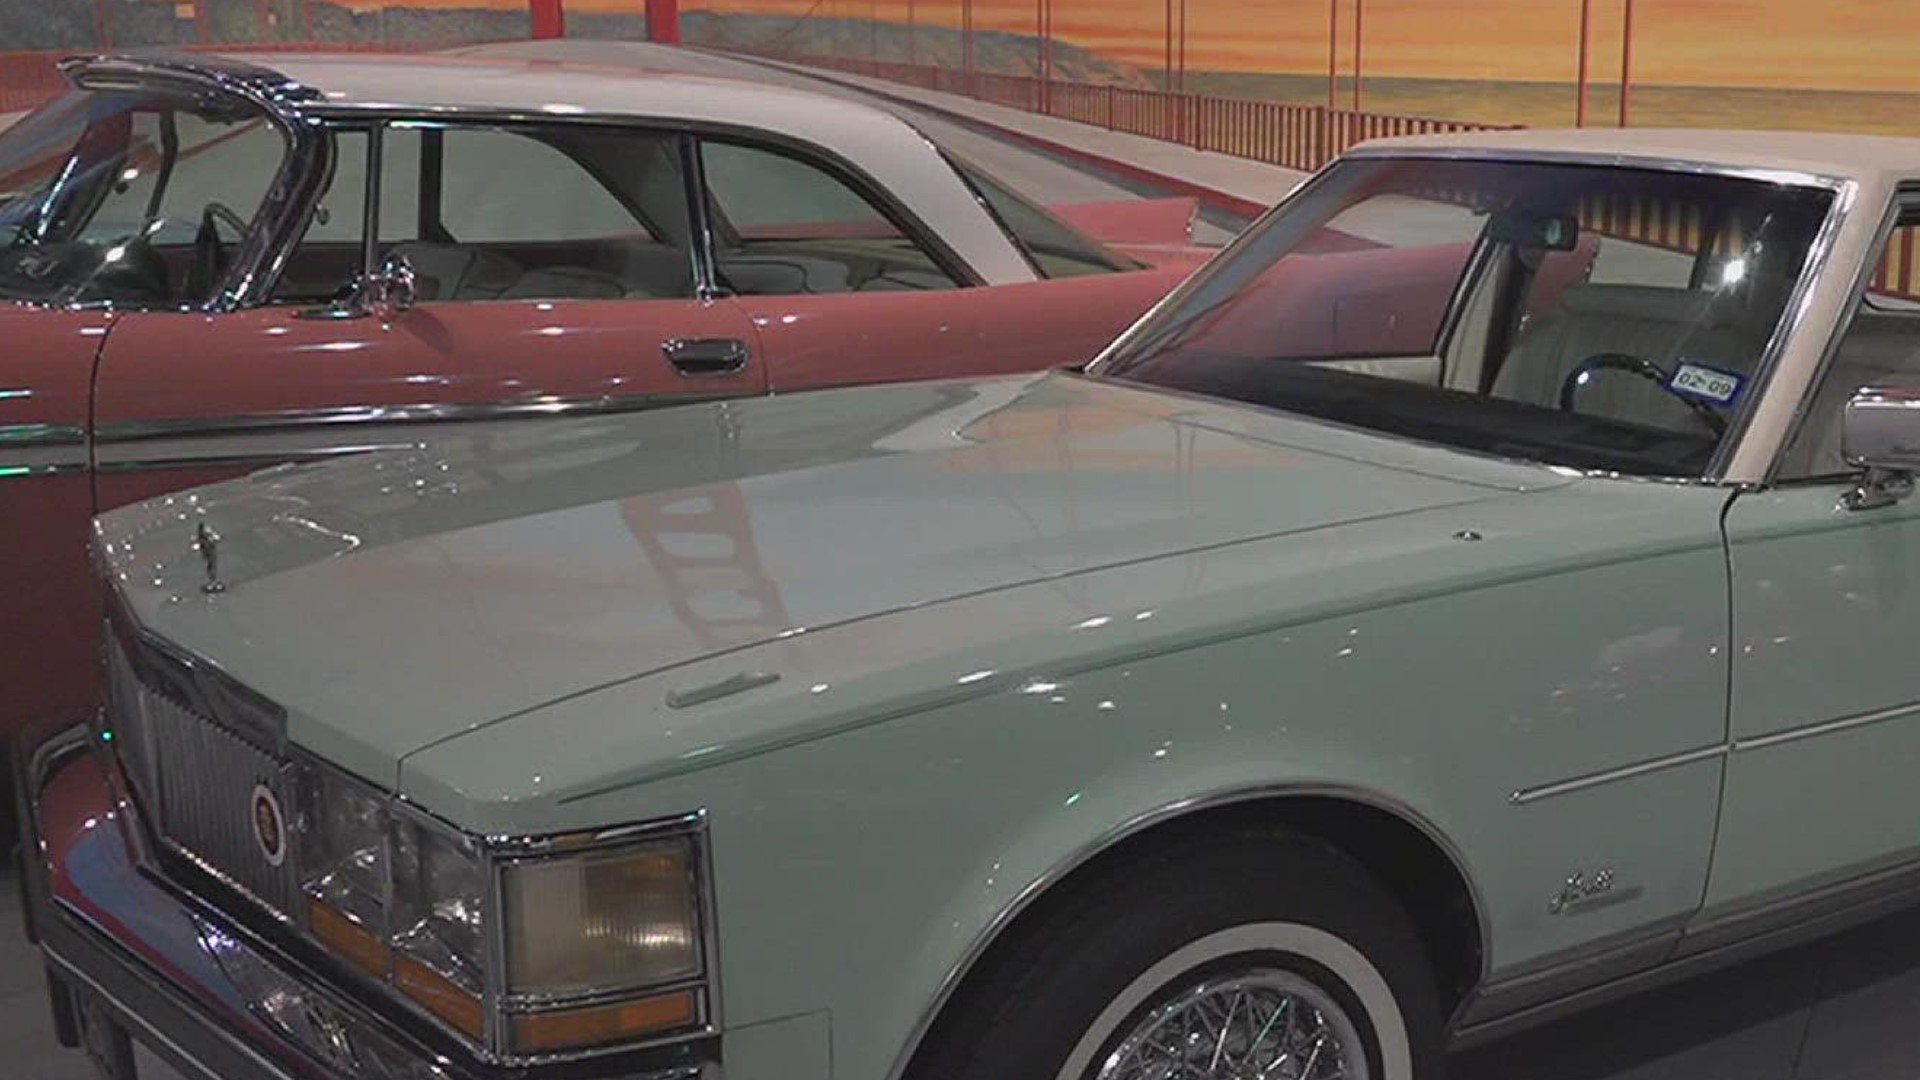 The Hershey Antique Auto Museum is the home of Betty White's 1977 Cadillac Seville named "Parakeet" and they honored her this weekend.